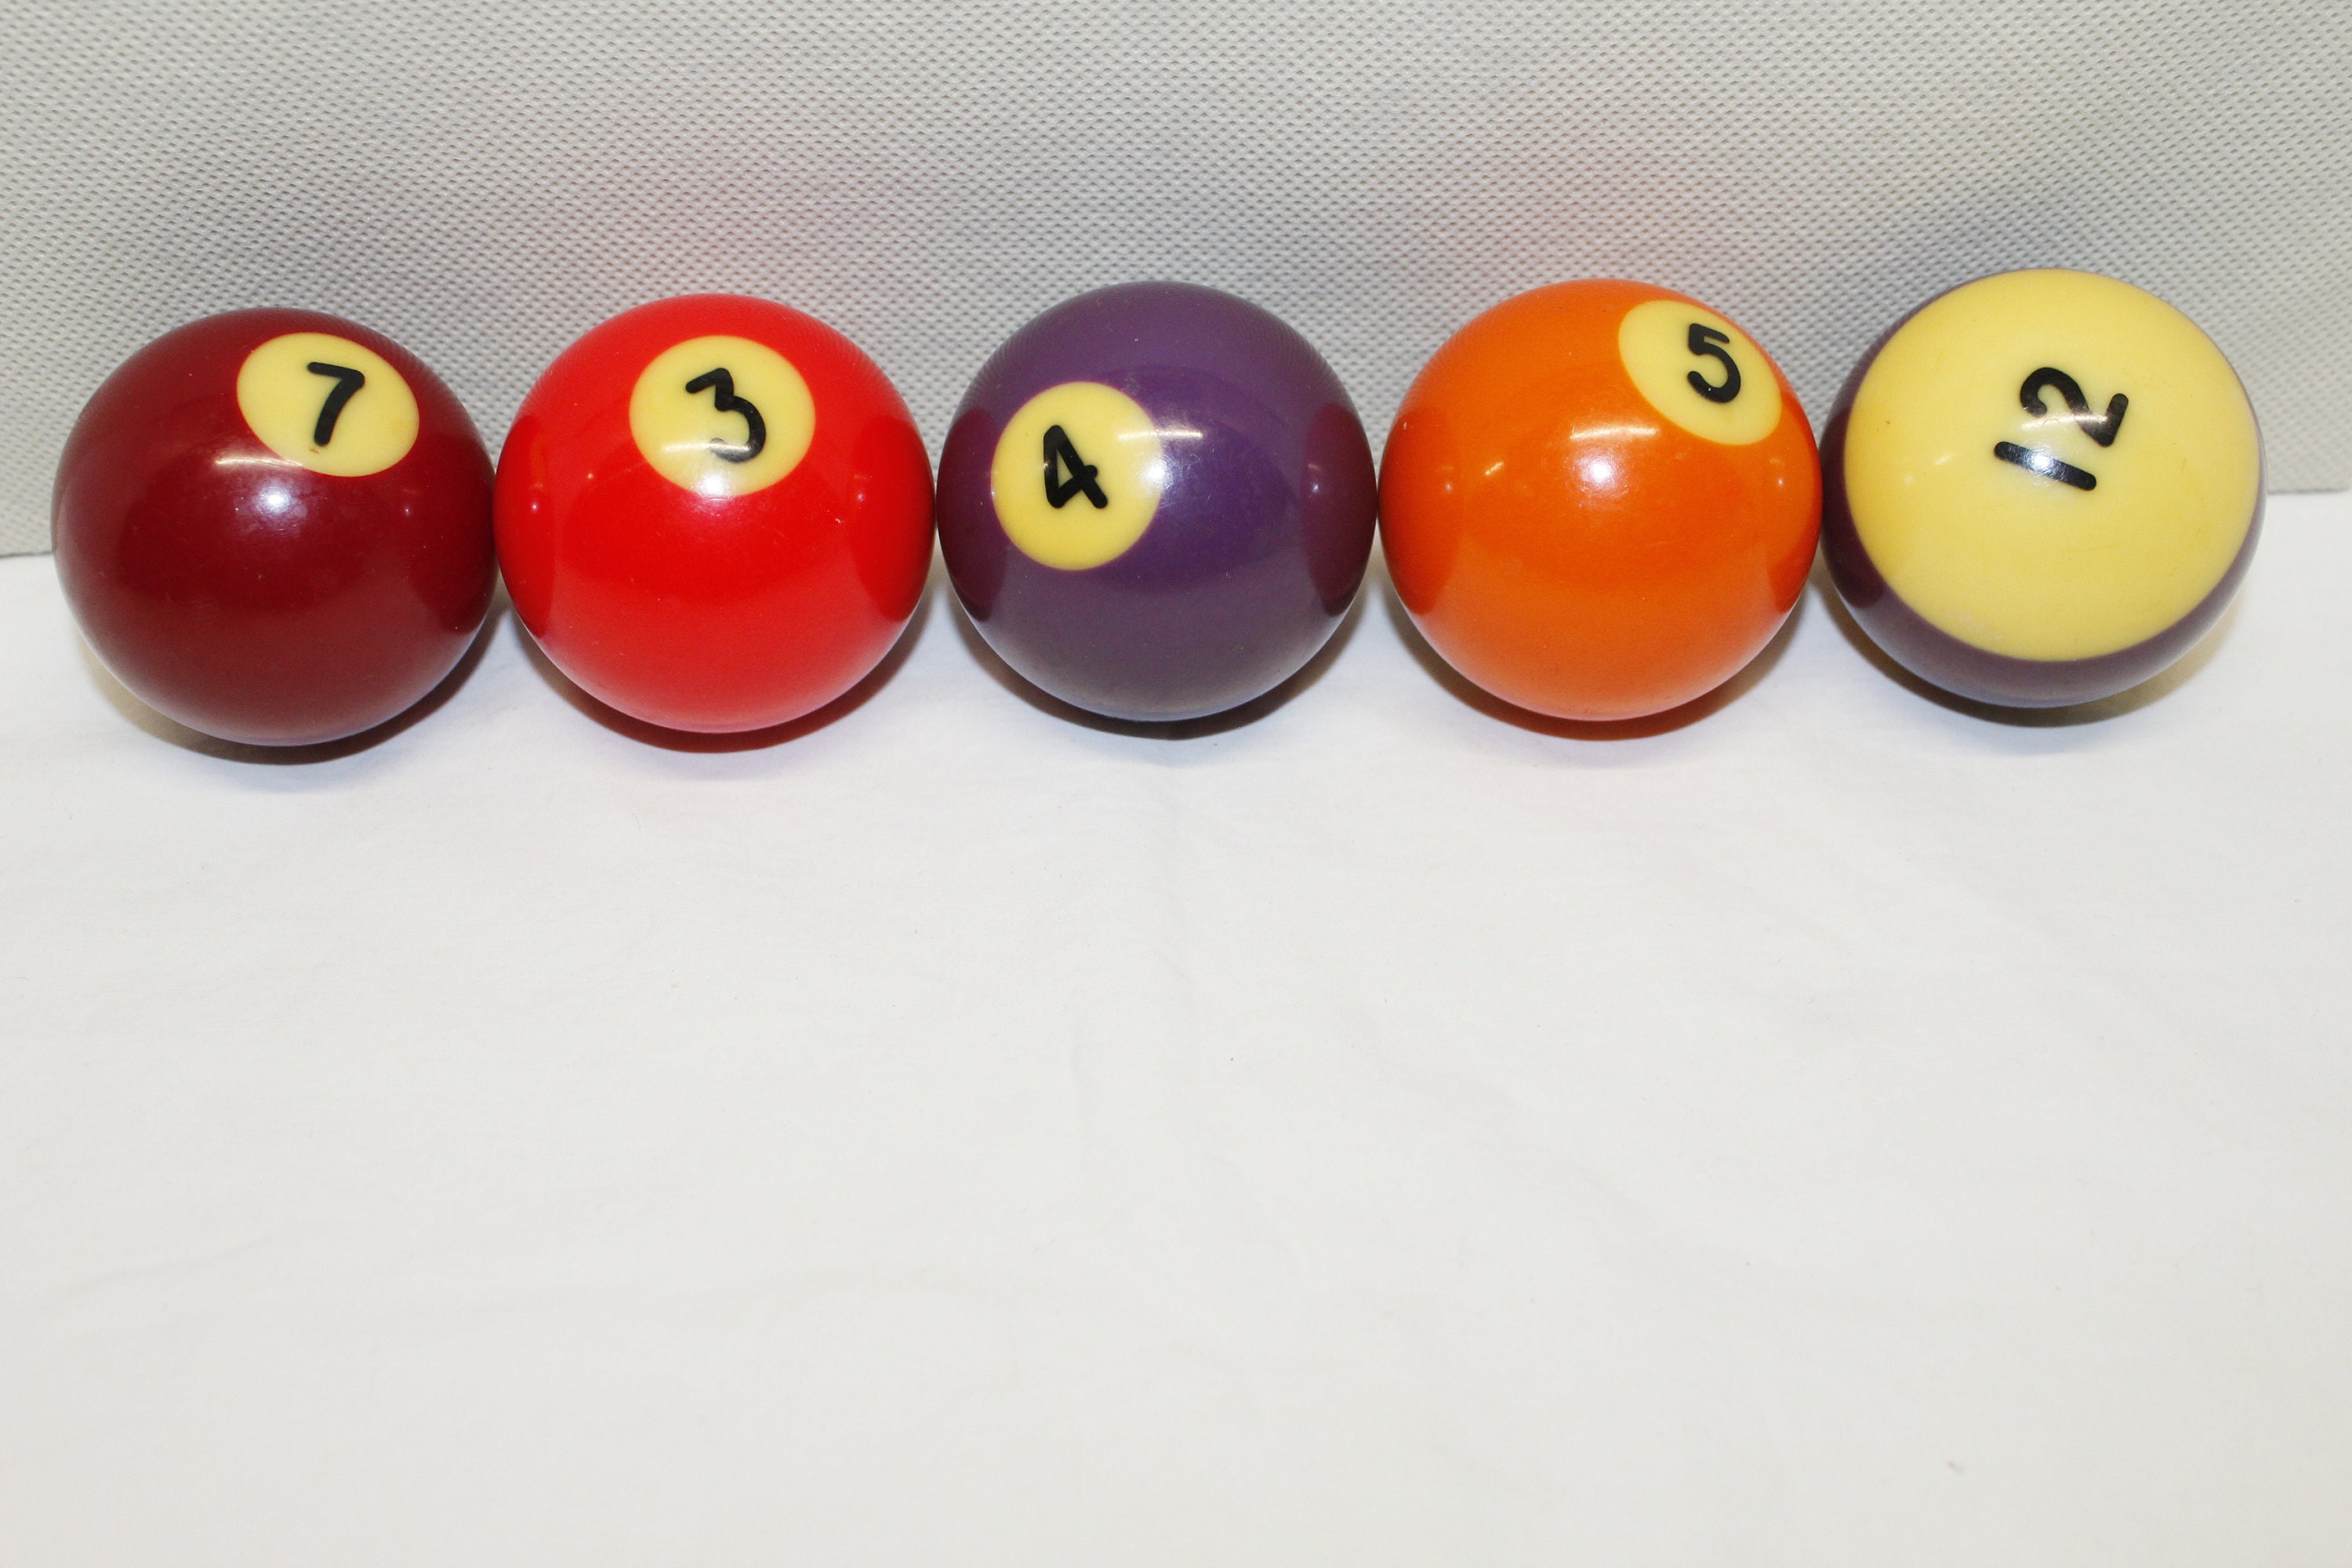 #8 Pool Ball FROM $10 SHIPPED,1500 VINTAGE, ANTIQUE BILLIARD BALLS Clay,  Aramith 